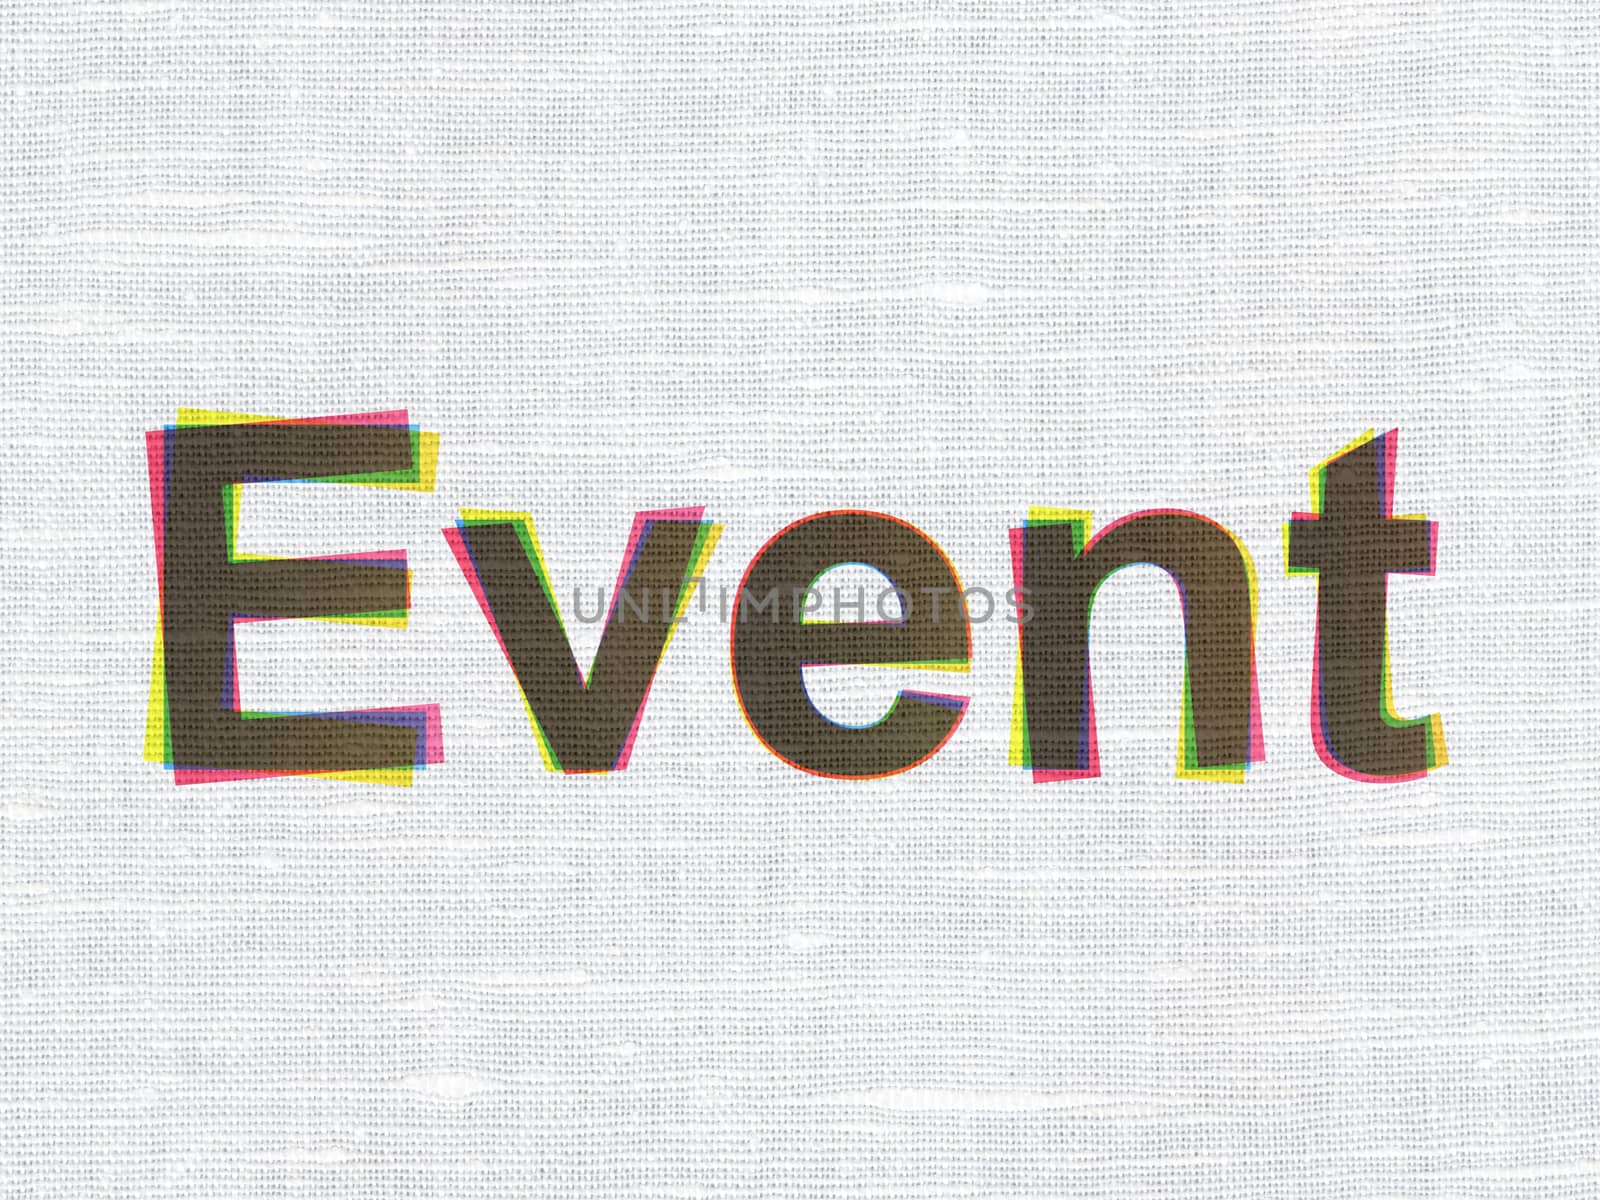 Holiday concept: CMYK Event on linen fabric texture background